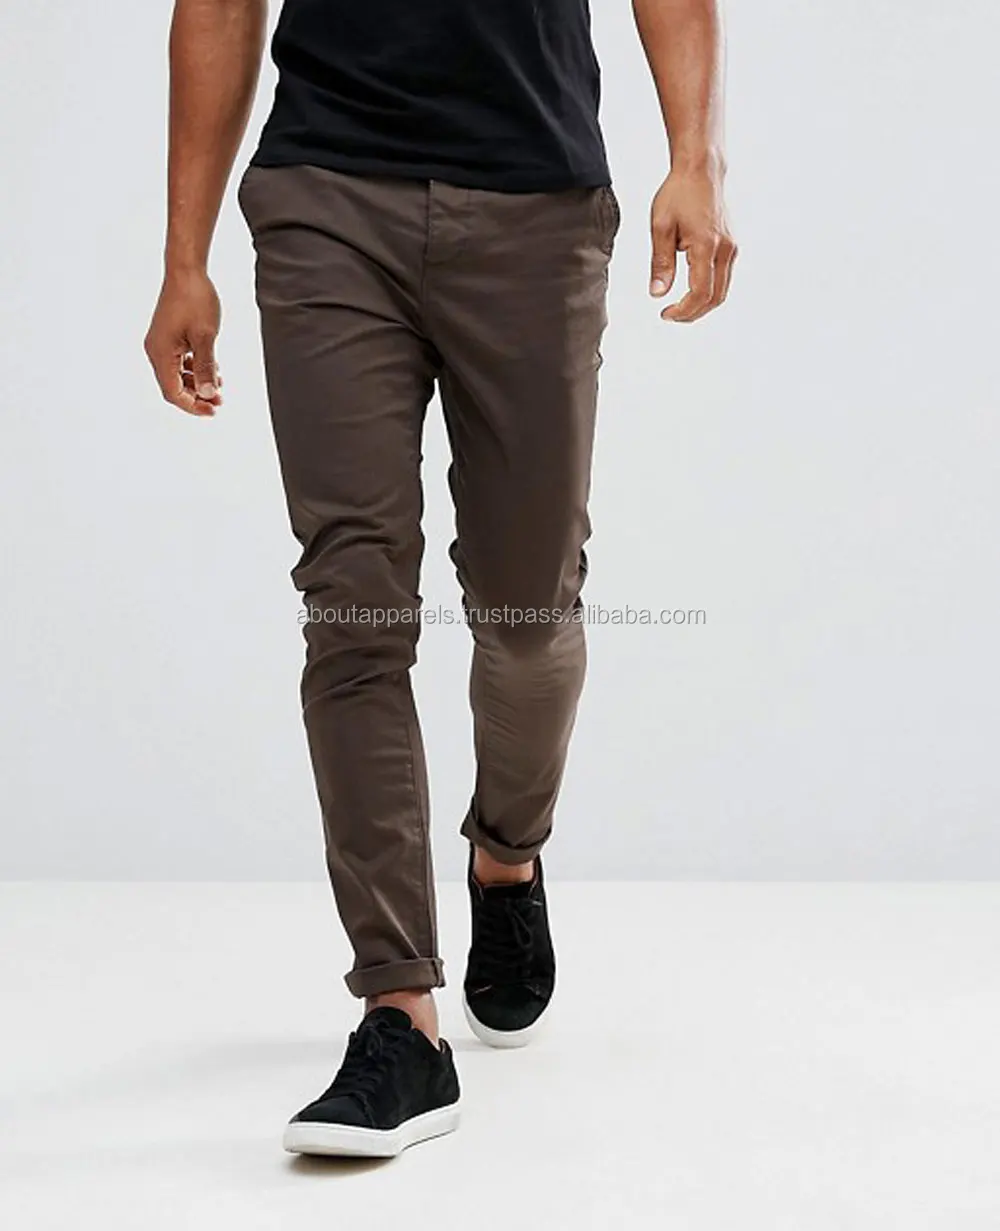 Buy  chino trousers at woolworths  Very cheap 